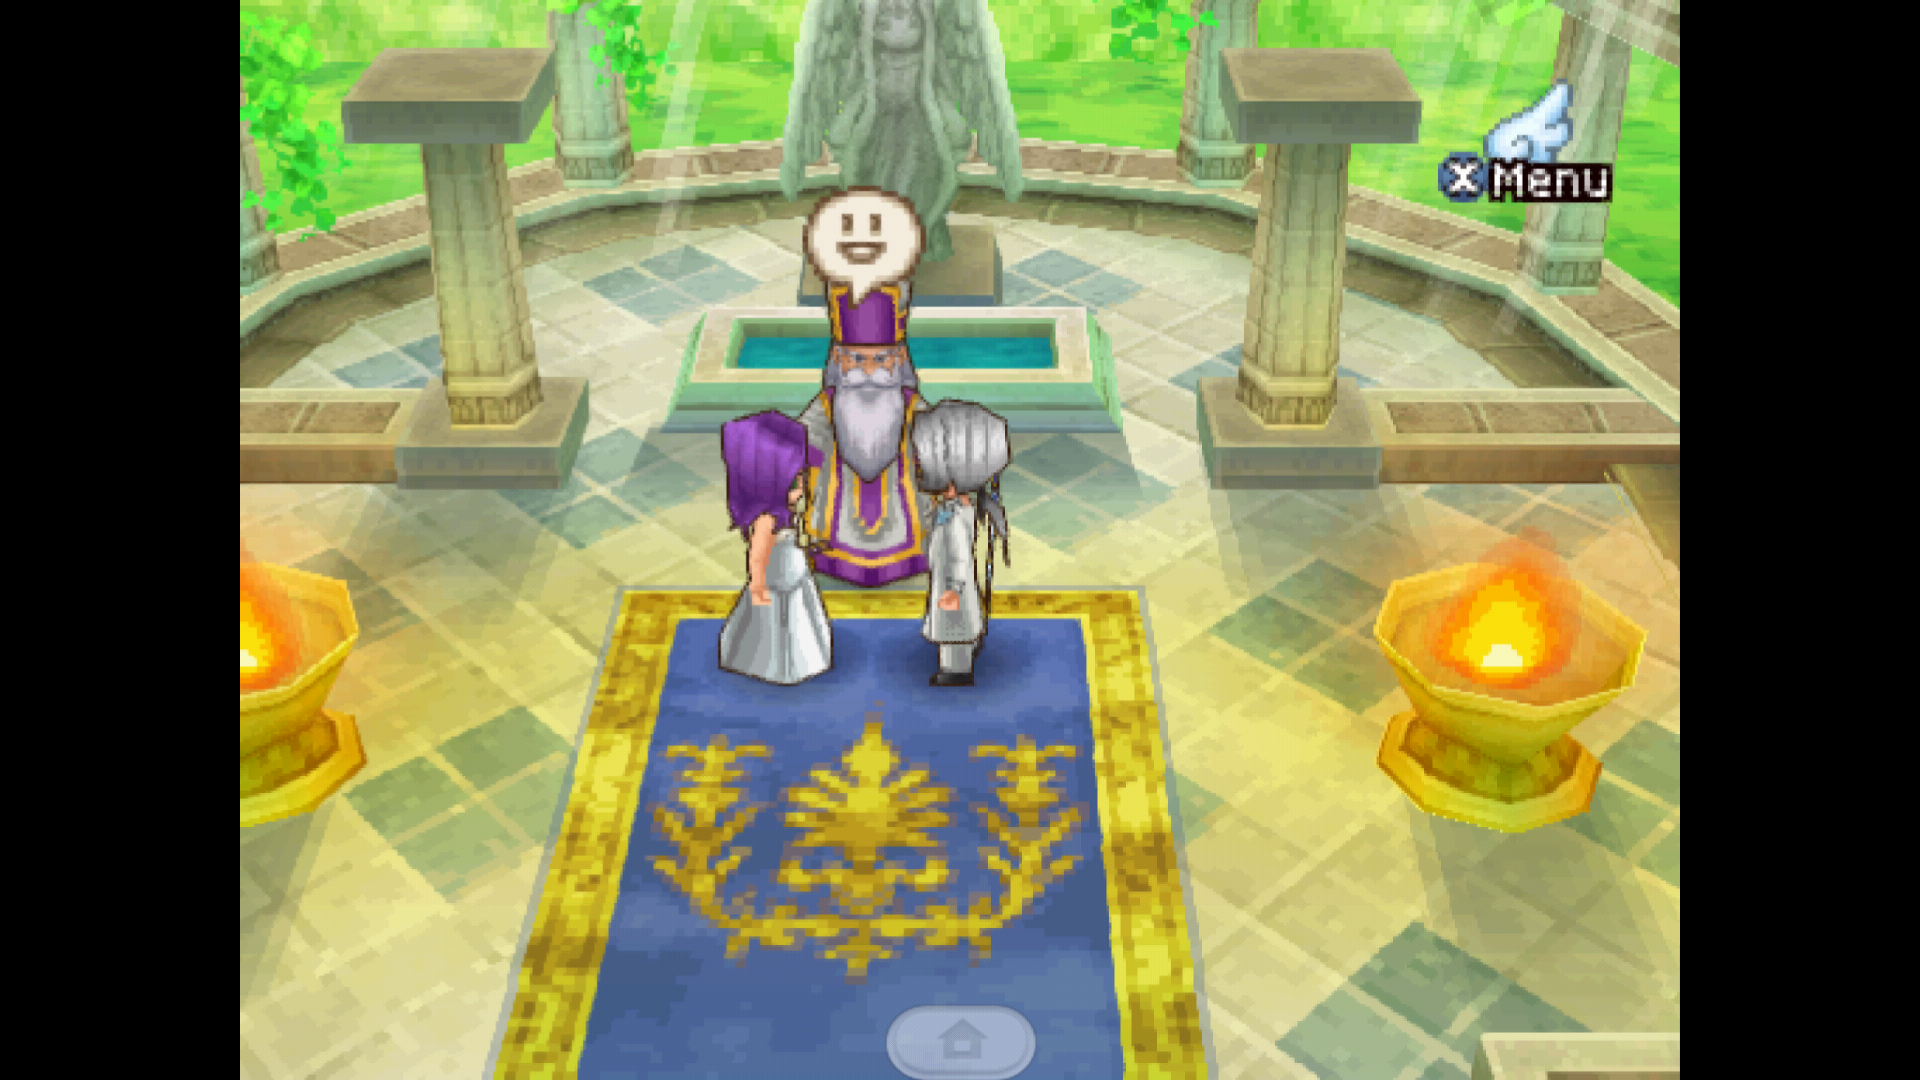 Dragon Quest IX - Sentinels of the Starry Skies (US)(M3) for nds screenshot